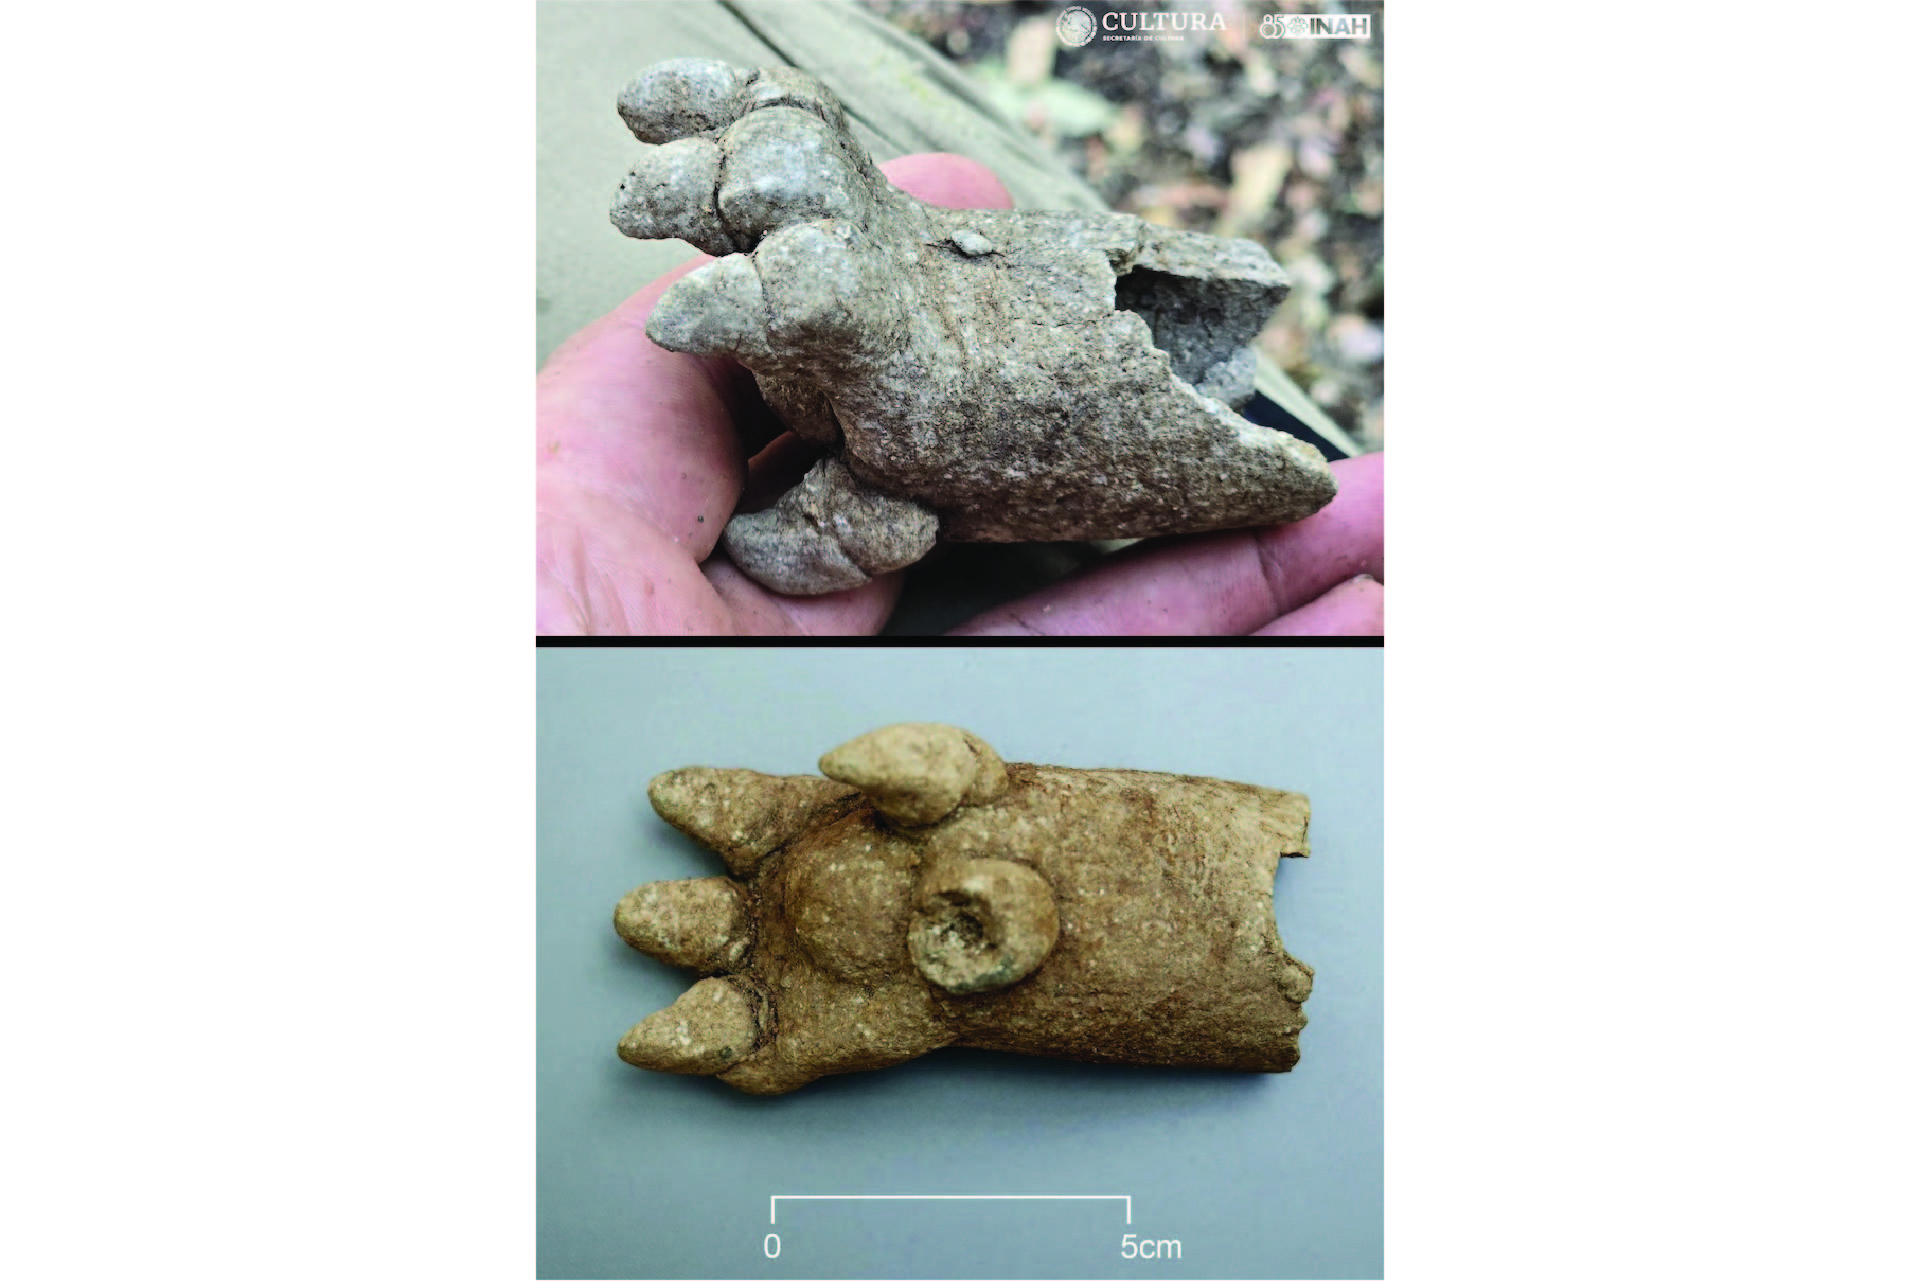 two views of a ceramic fragment of an animal paw